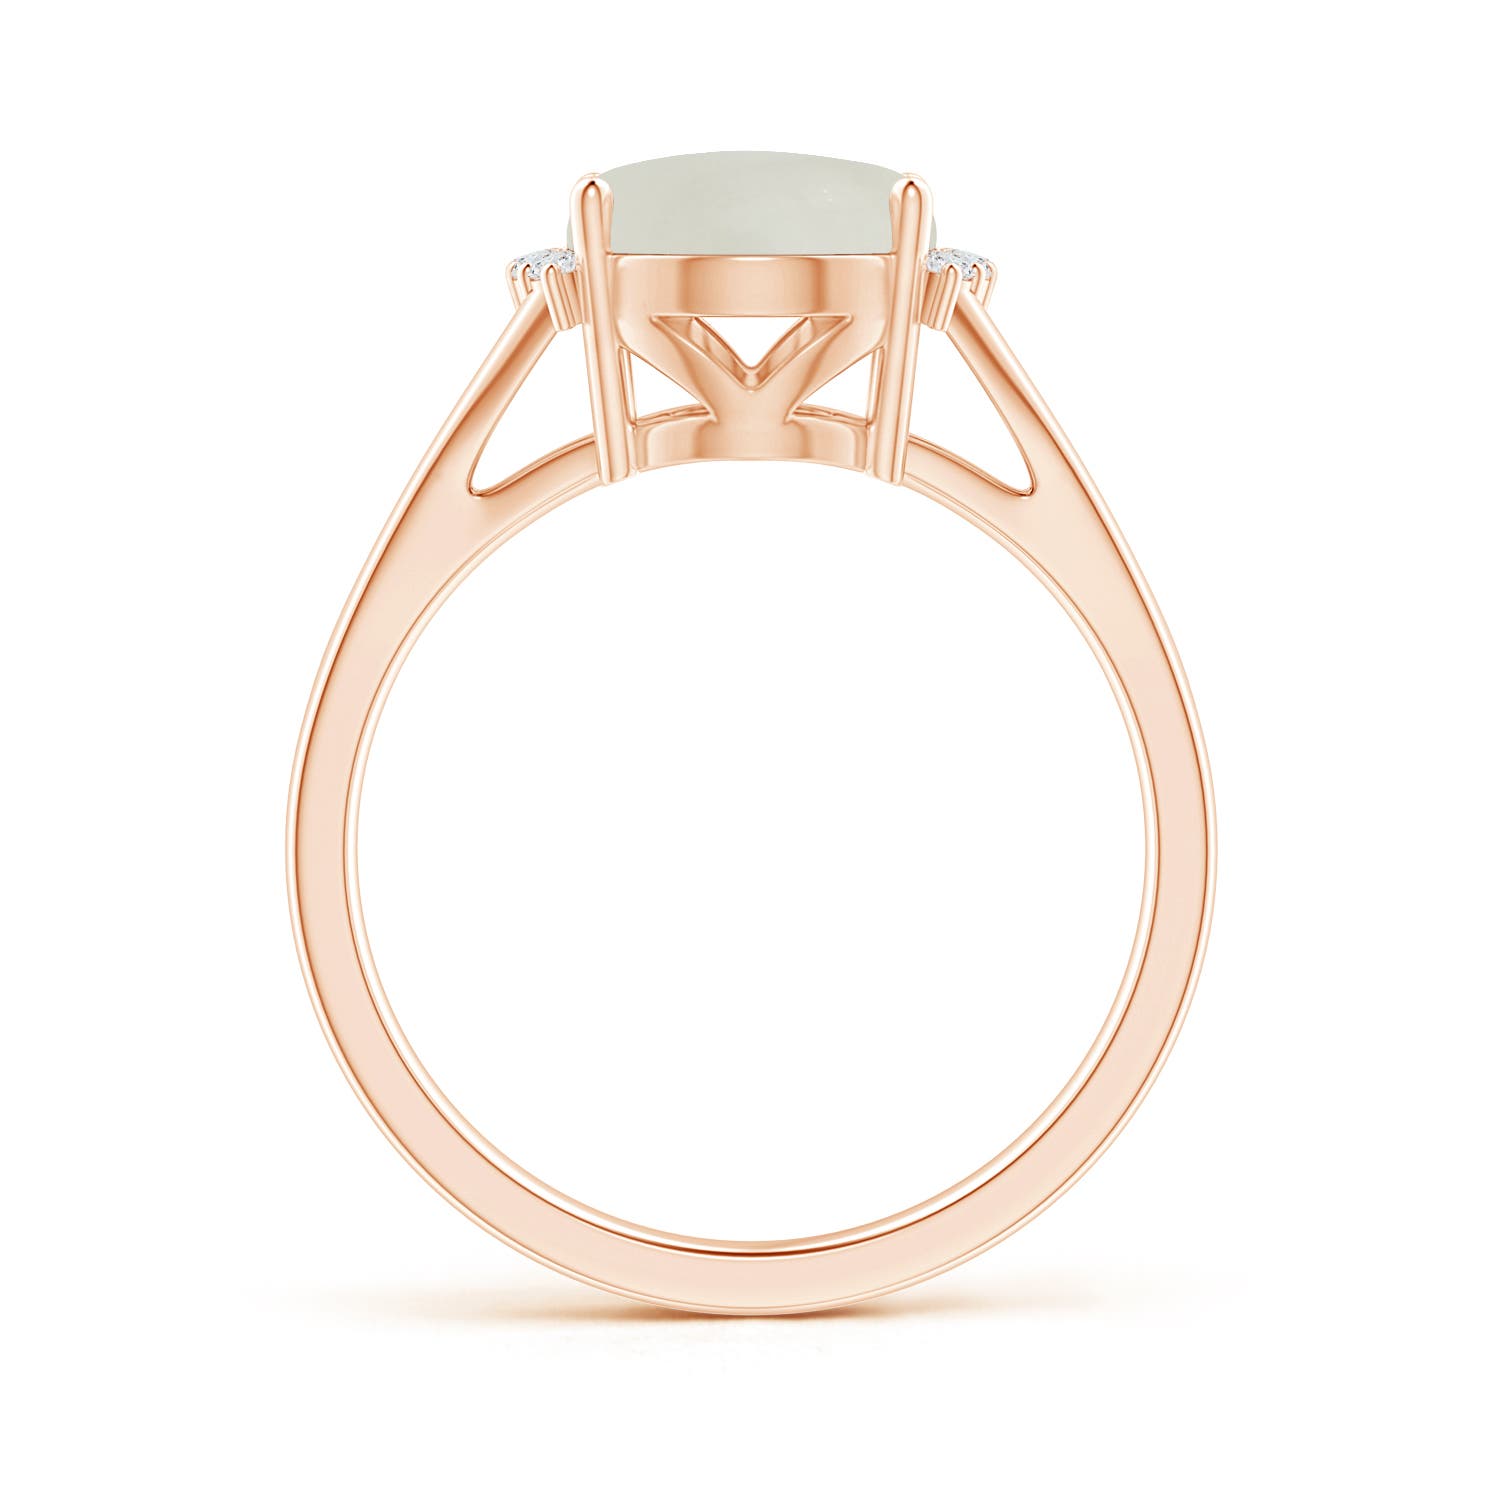 AAA - Moonstone / 2.6 CT / 14 KT Rose Gold